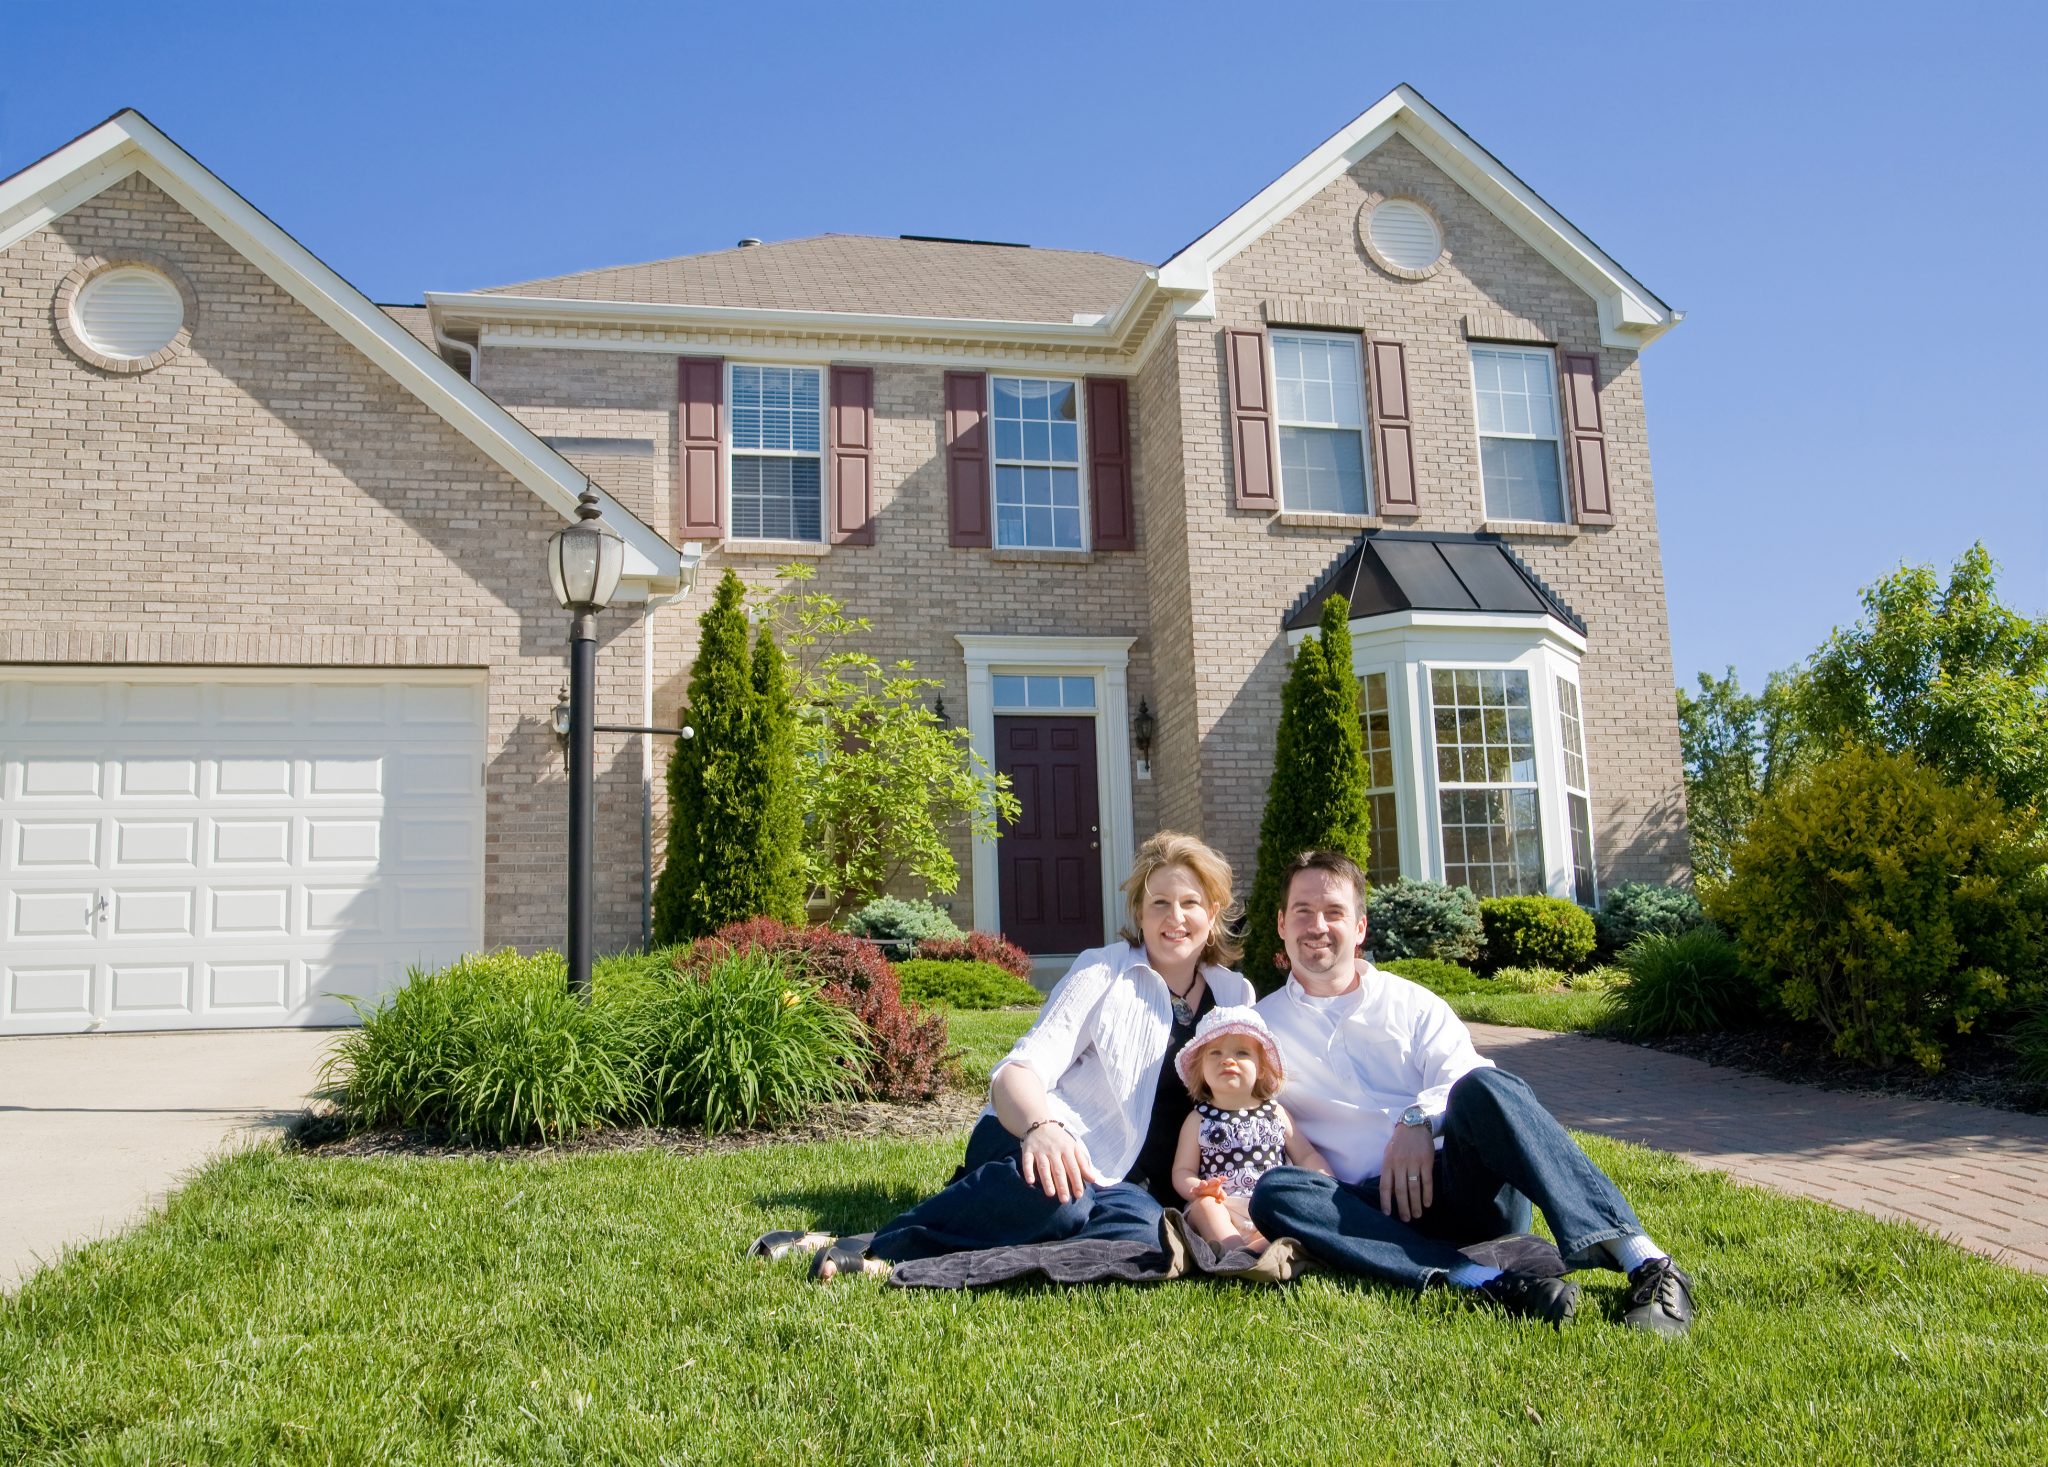 How To Look Good To A Mortgage Underwriter-Curb Appeal For Your Loan and Your Lawn